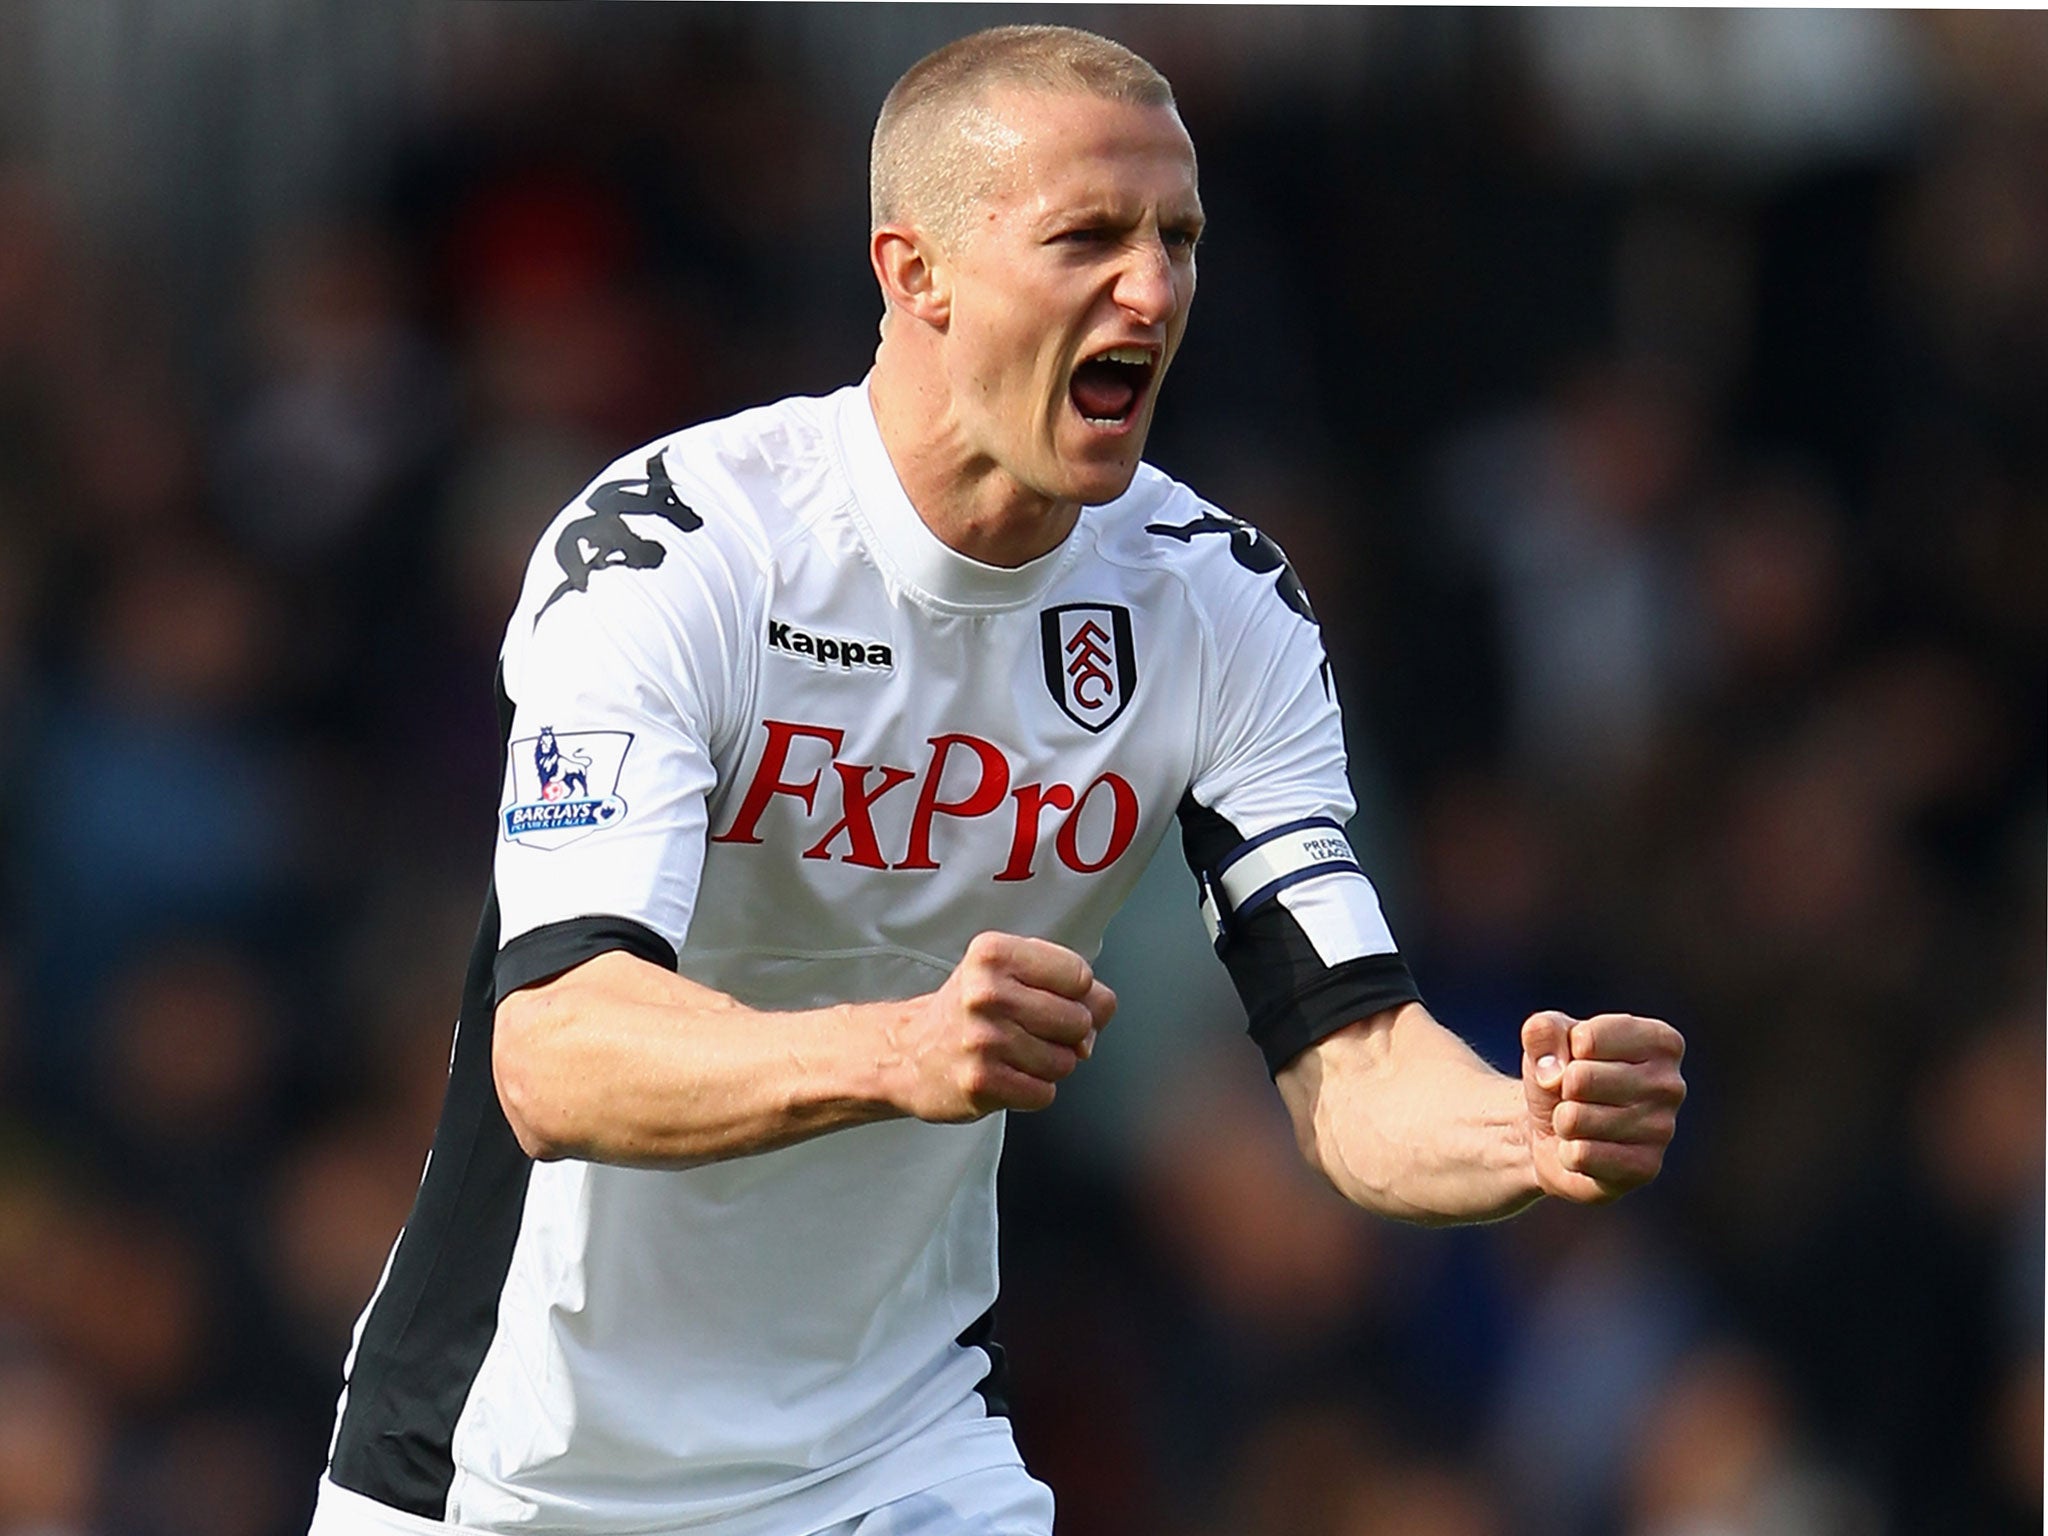 Brede Hangeland The Fulham captain could prove to be an astute bit of business either now or in the summer for clubs seeking defensive reinforcements and Cottagers fans will be alarmed that one of their star men has not been signed up as yet,